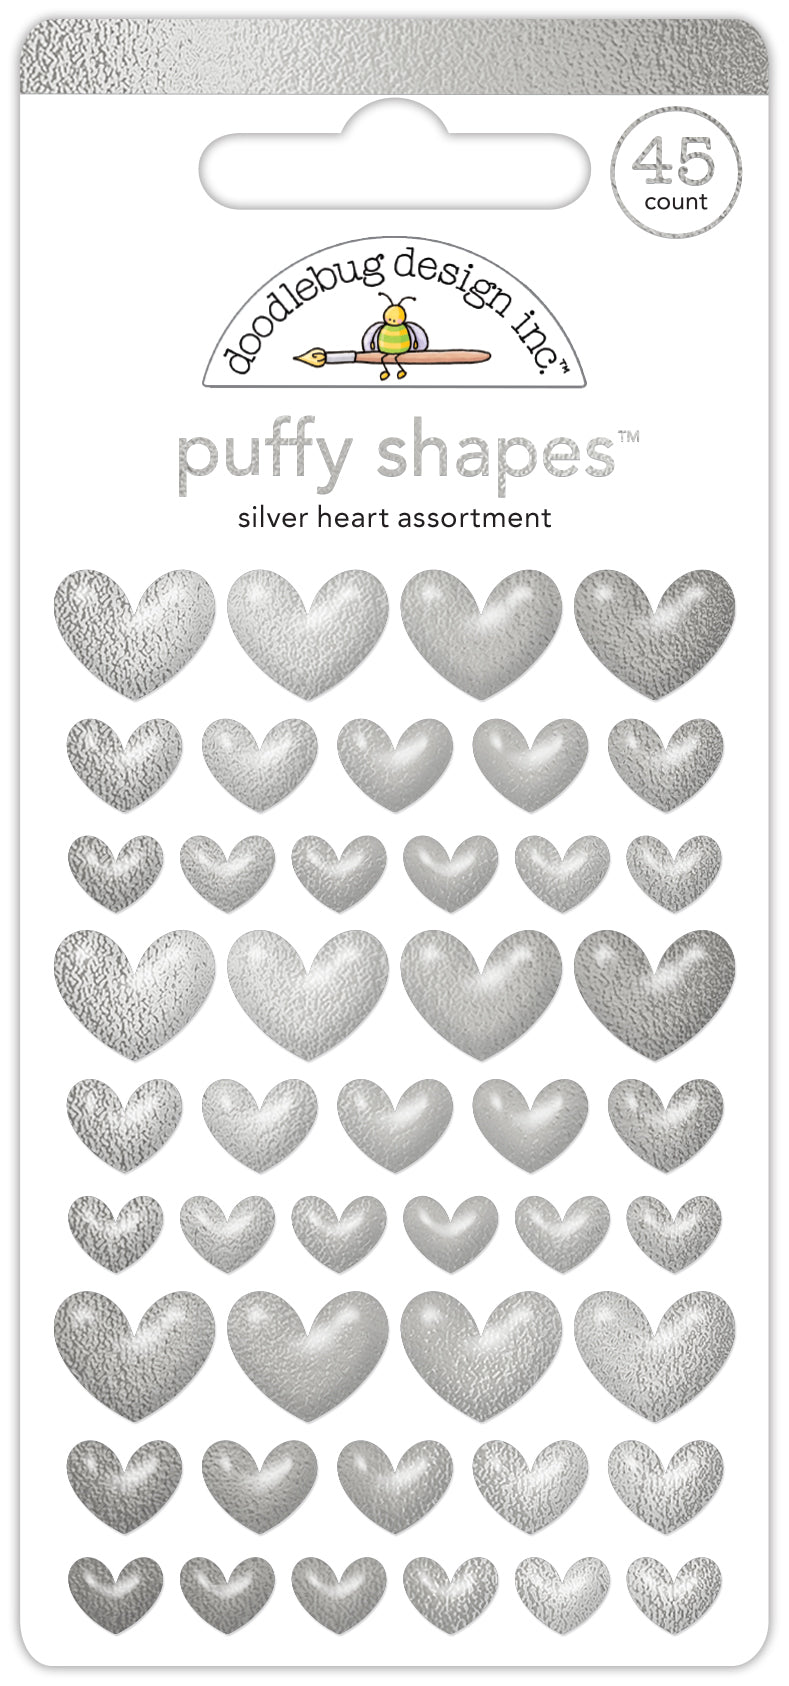 Silver Heart Puffy Shapes